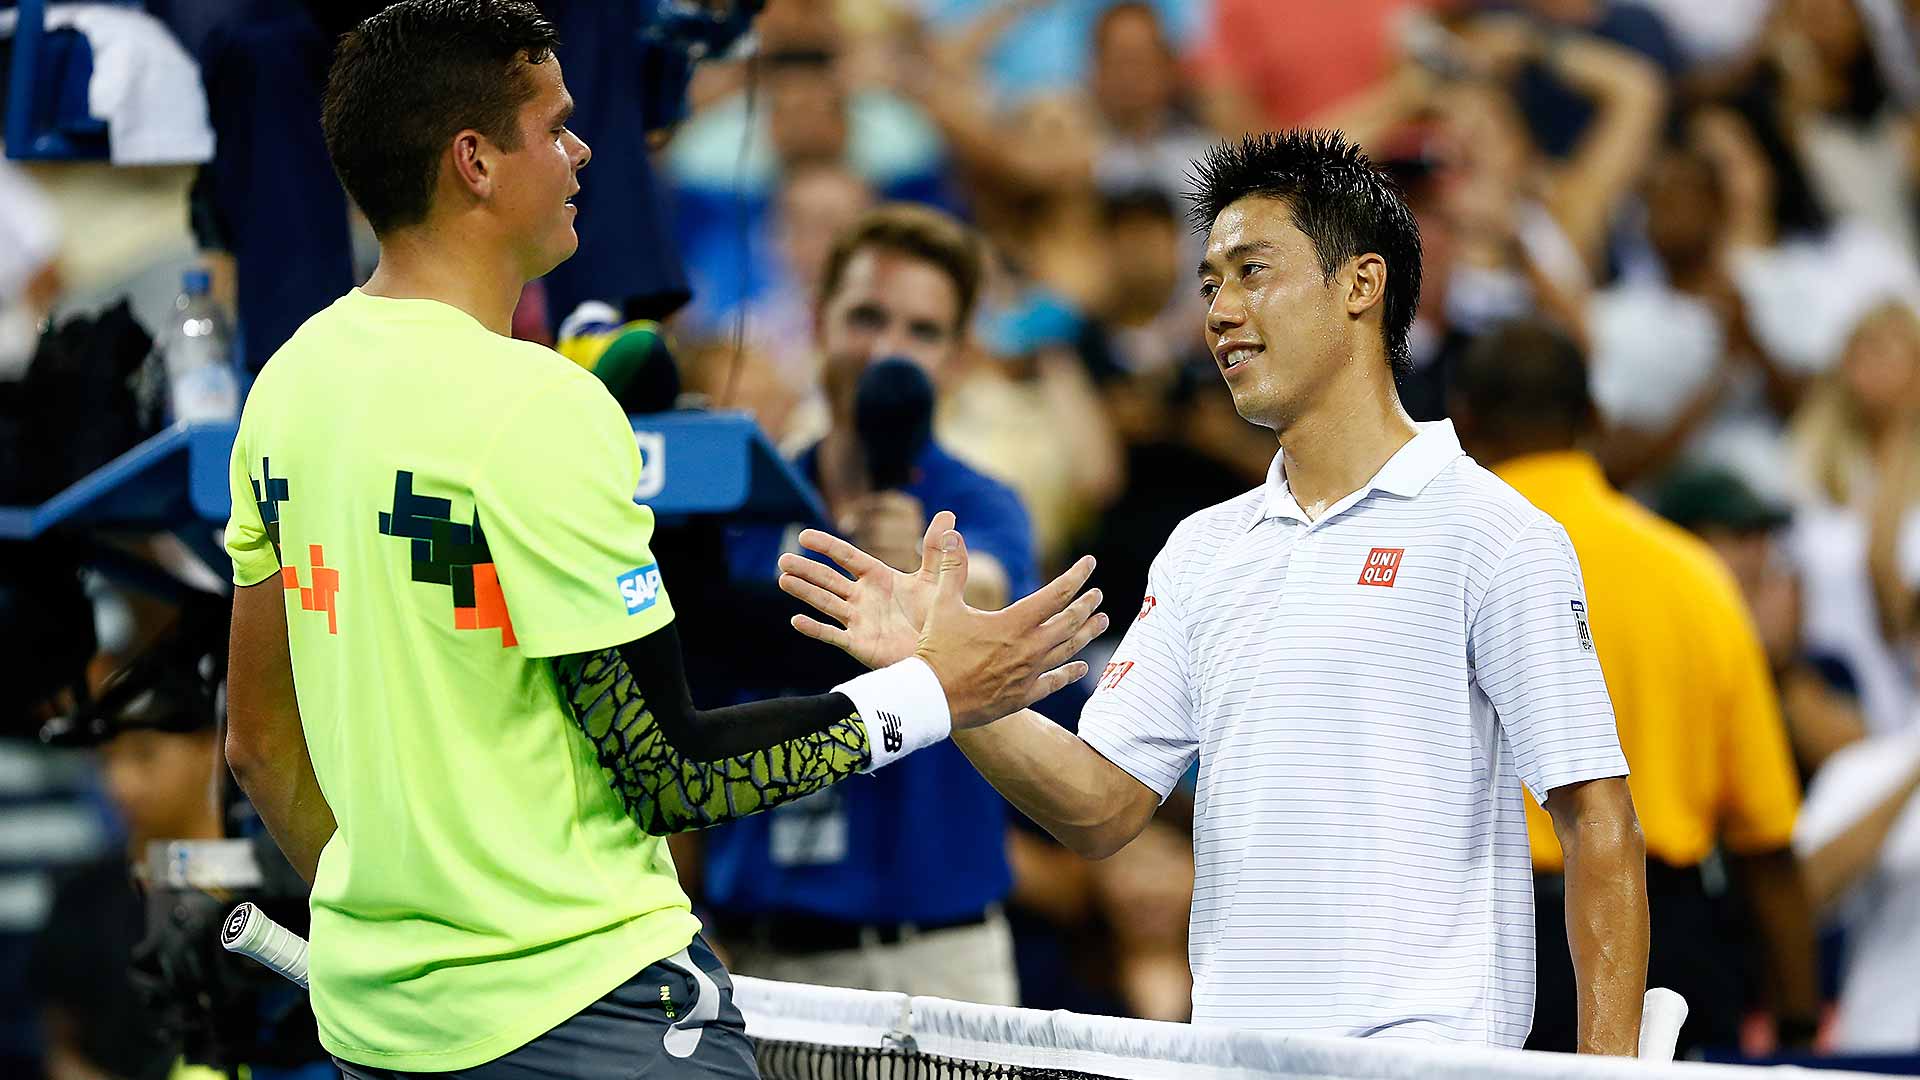 Milos Raonic and Kei Nishikori finish their marathon match at the 2014 US Open at a record-tying 2:26am local time. 